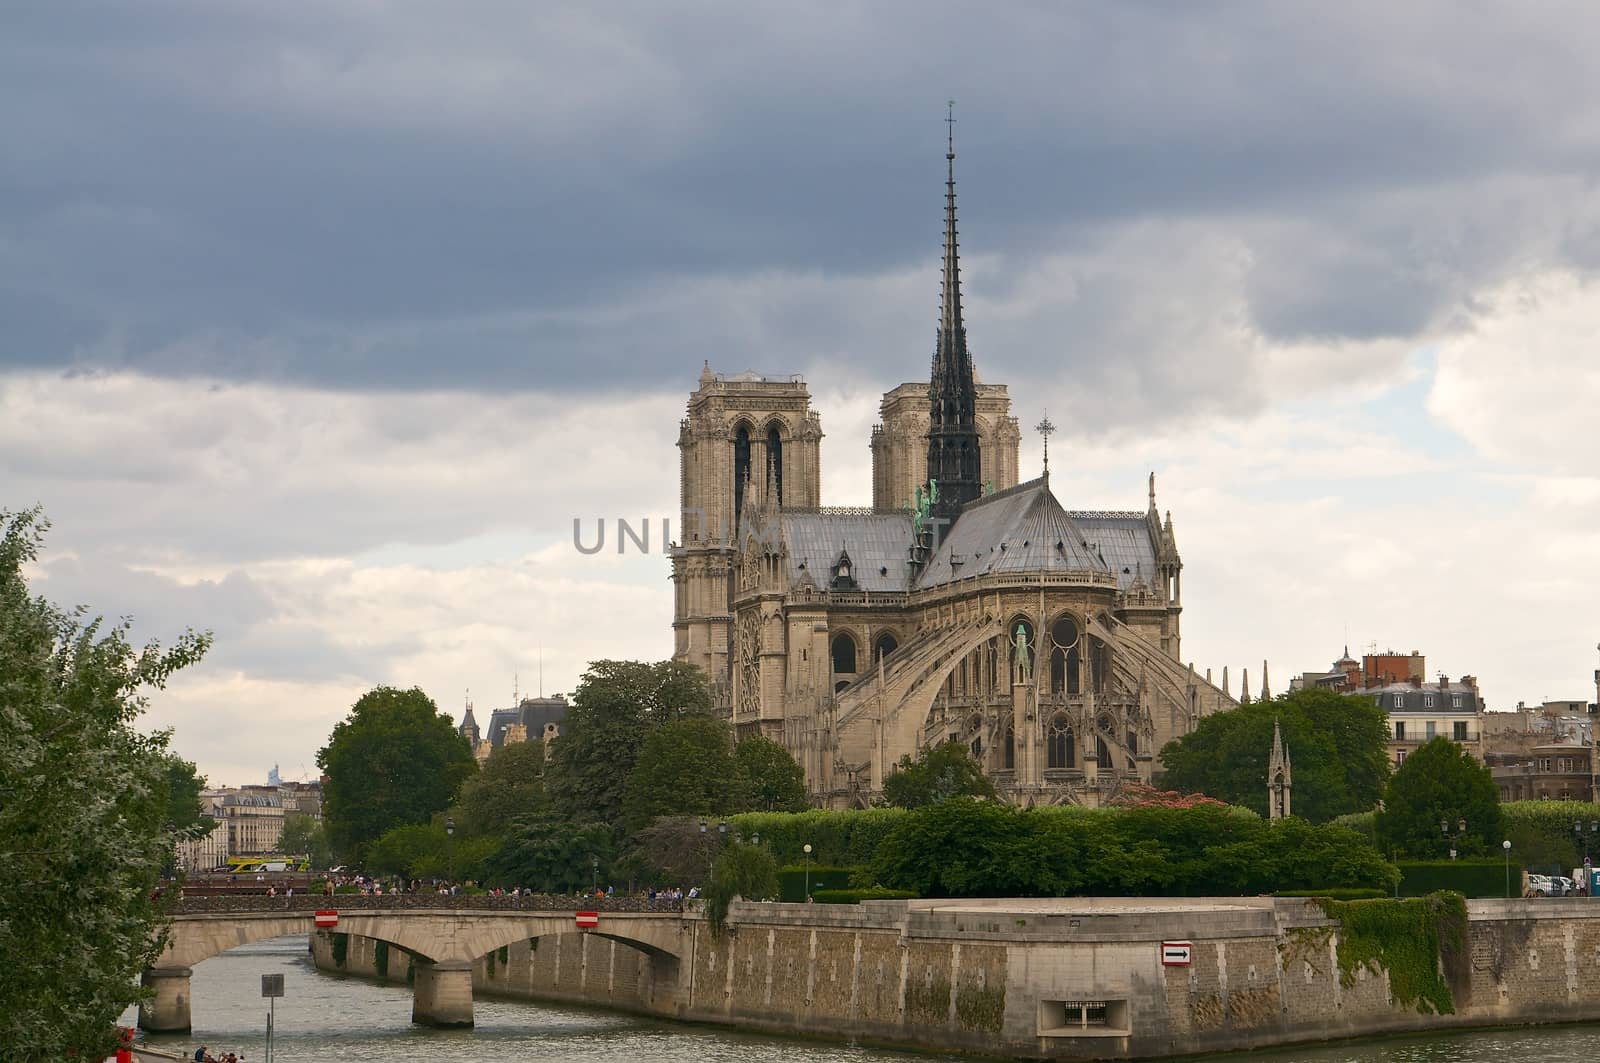 Notre Dame from the river by dyvan